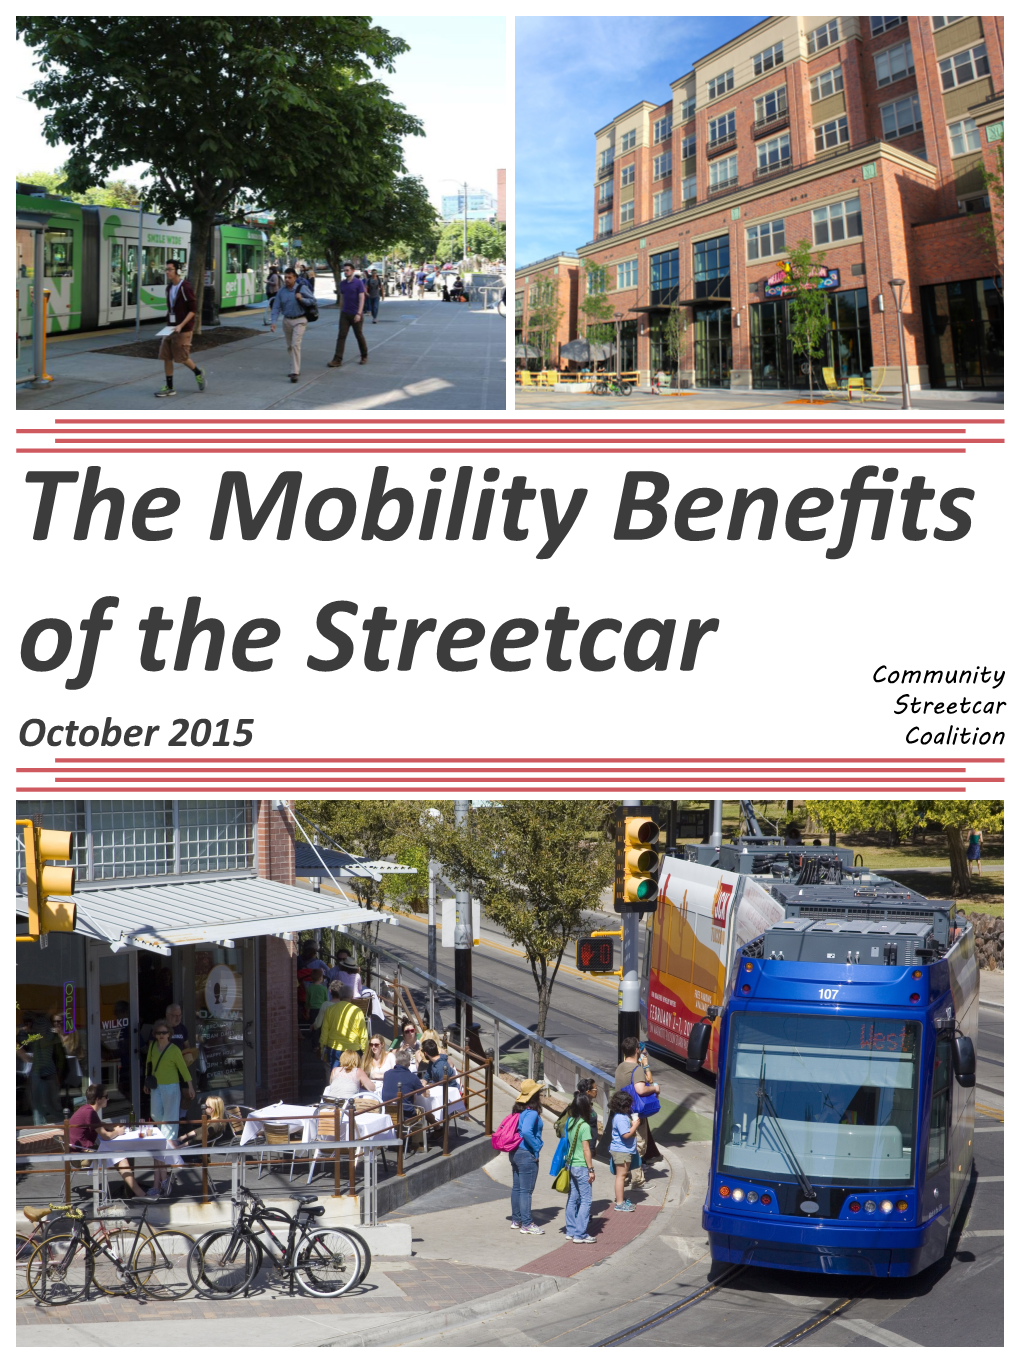 The Mobility Benefits of the Streetcar Community Streetcar October 2015 Coalition Prepared By: Community Streetcar Coalition